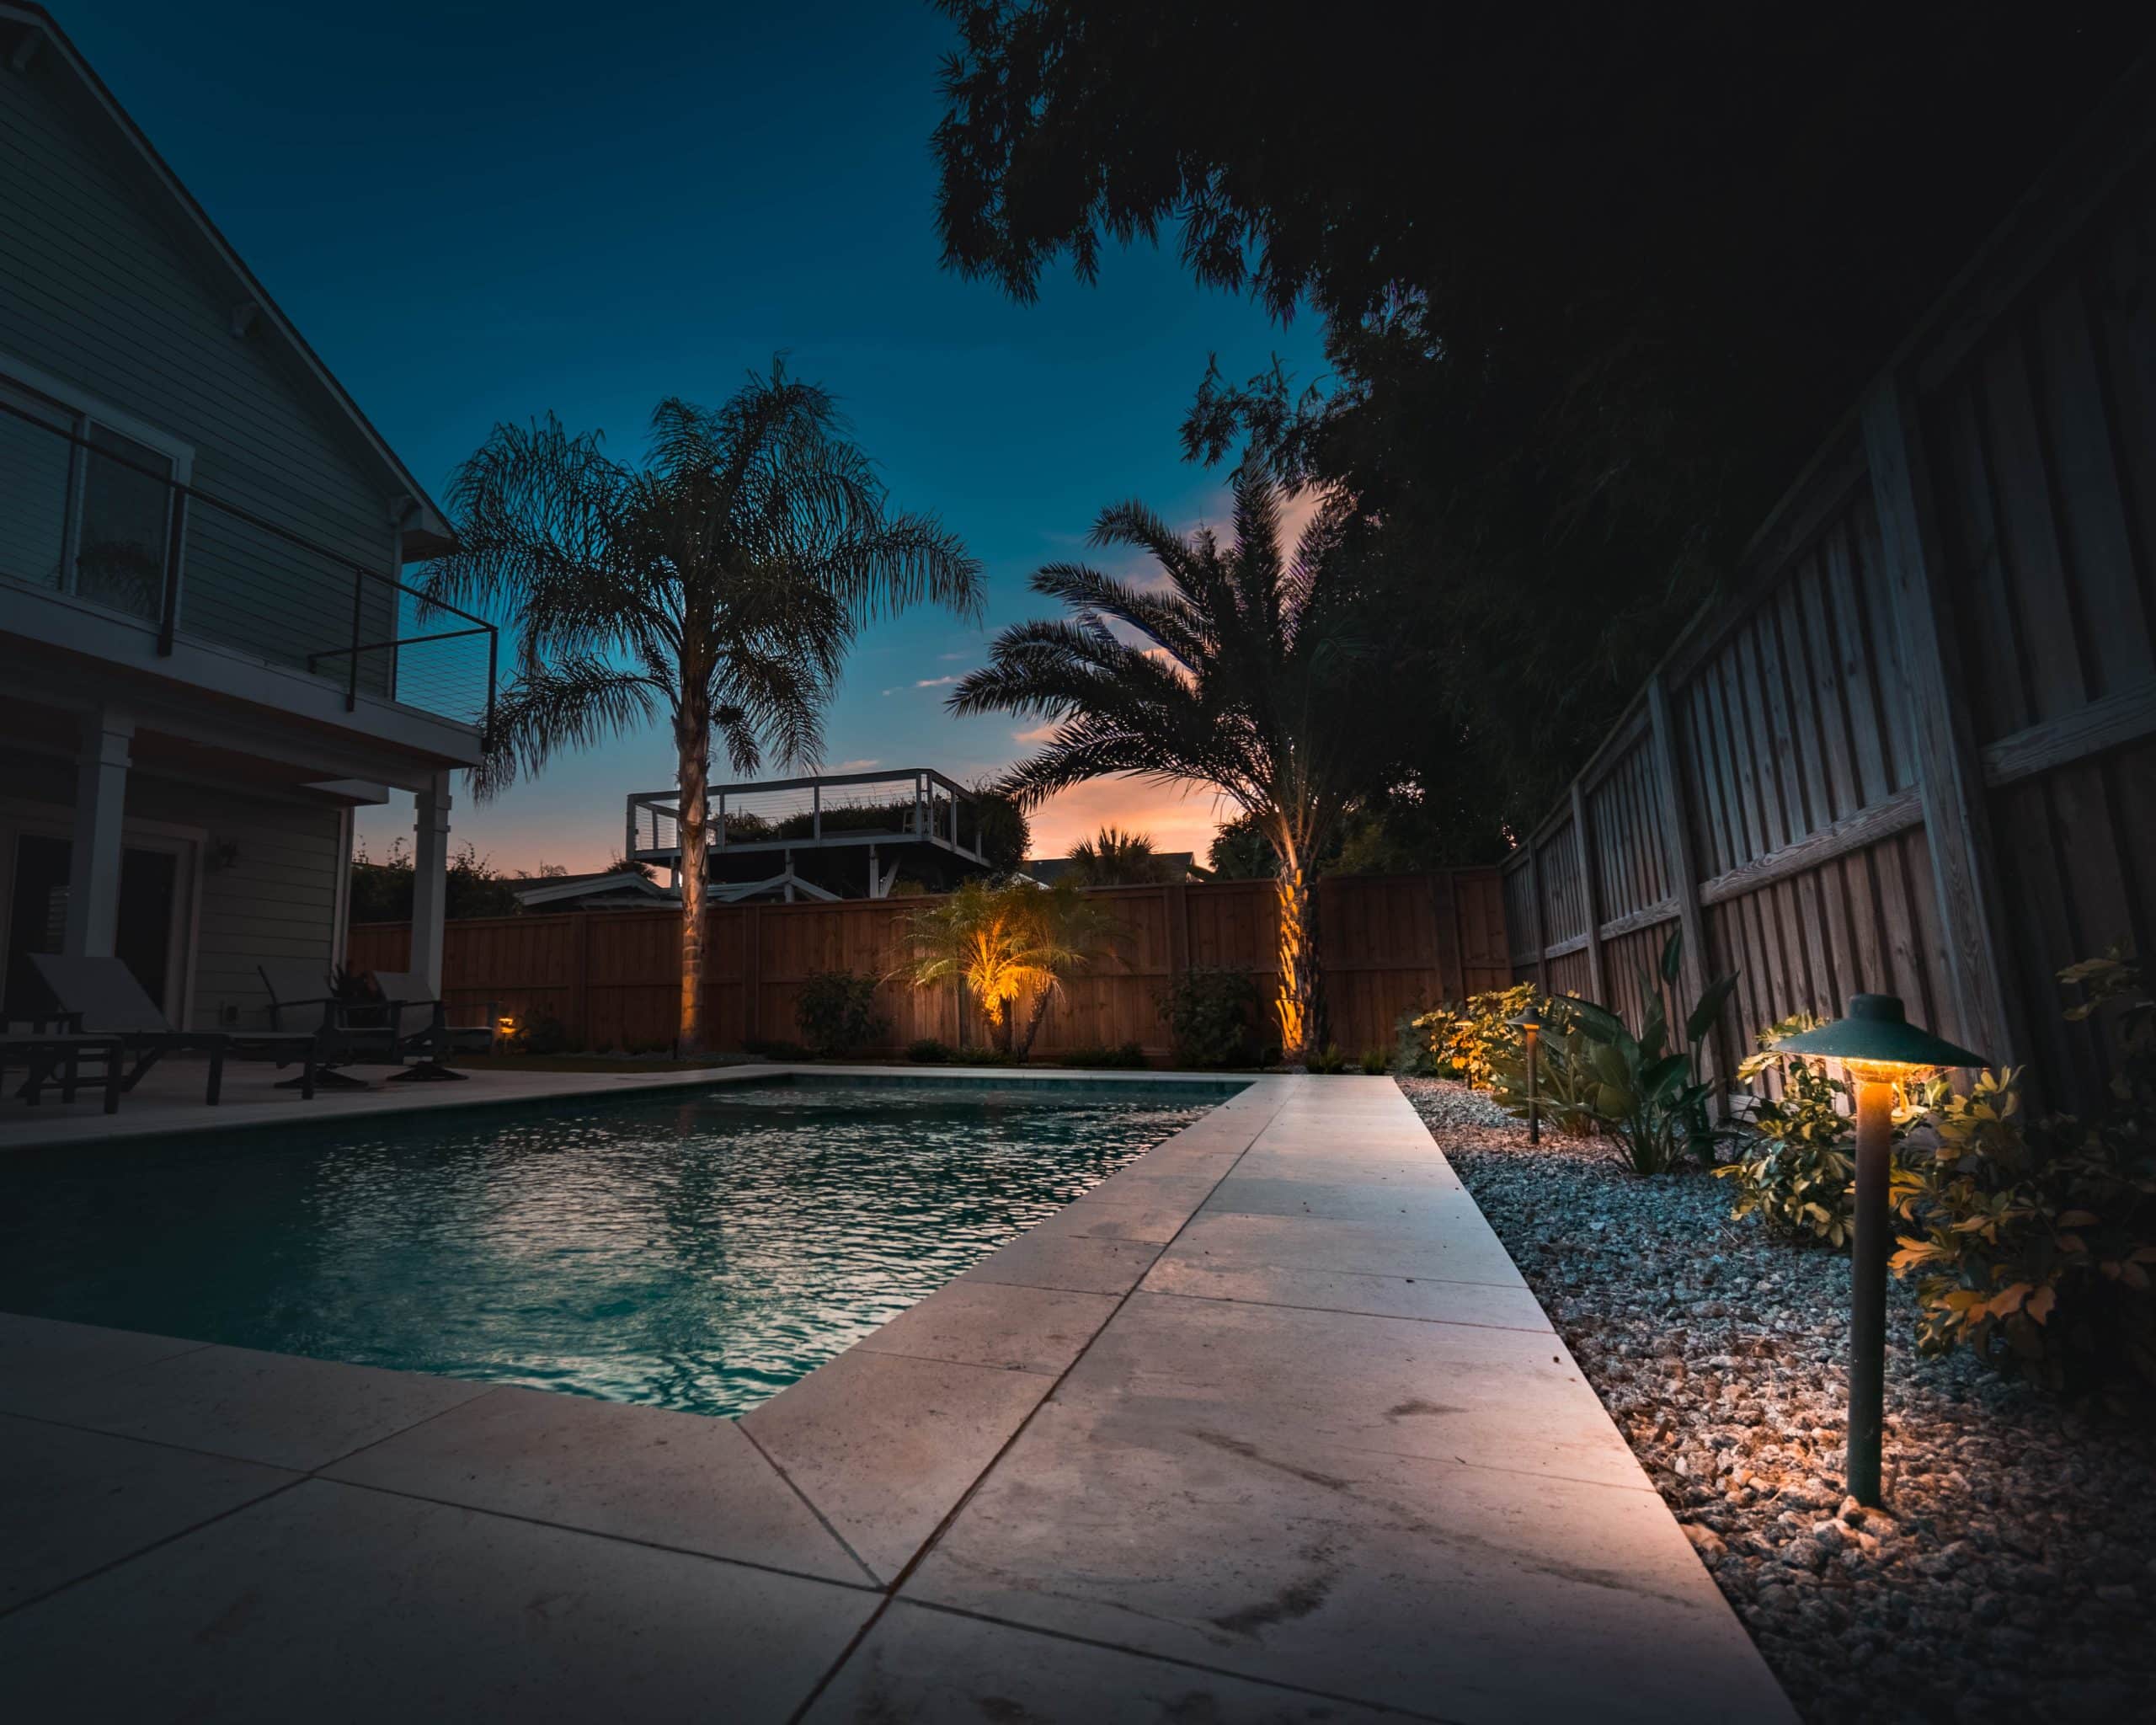 New Construction Landscaping Lighting - thermal pool deck pavers night view